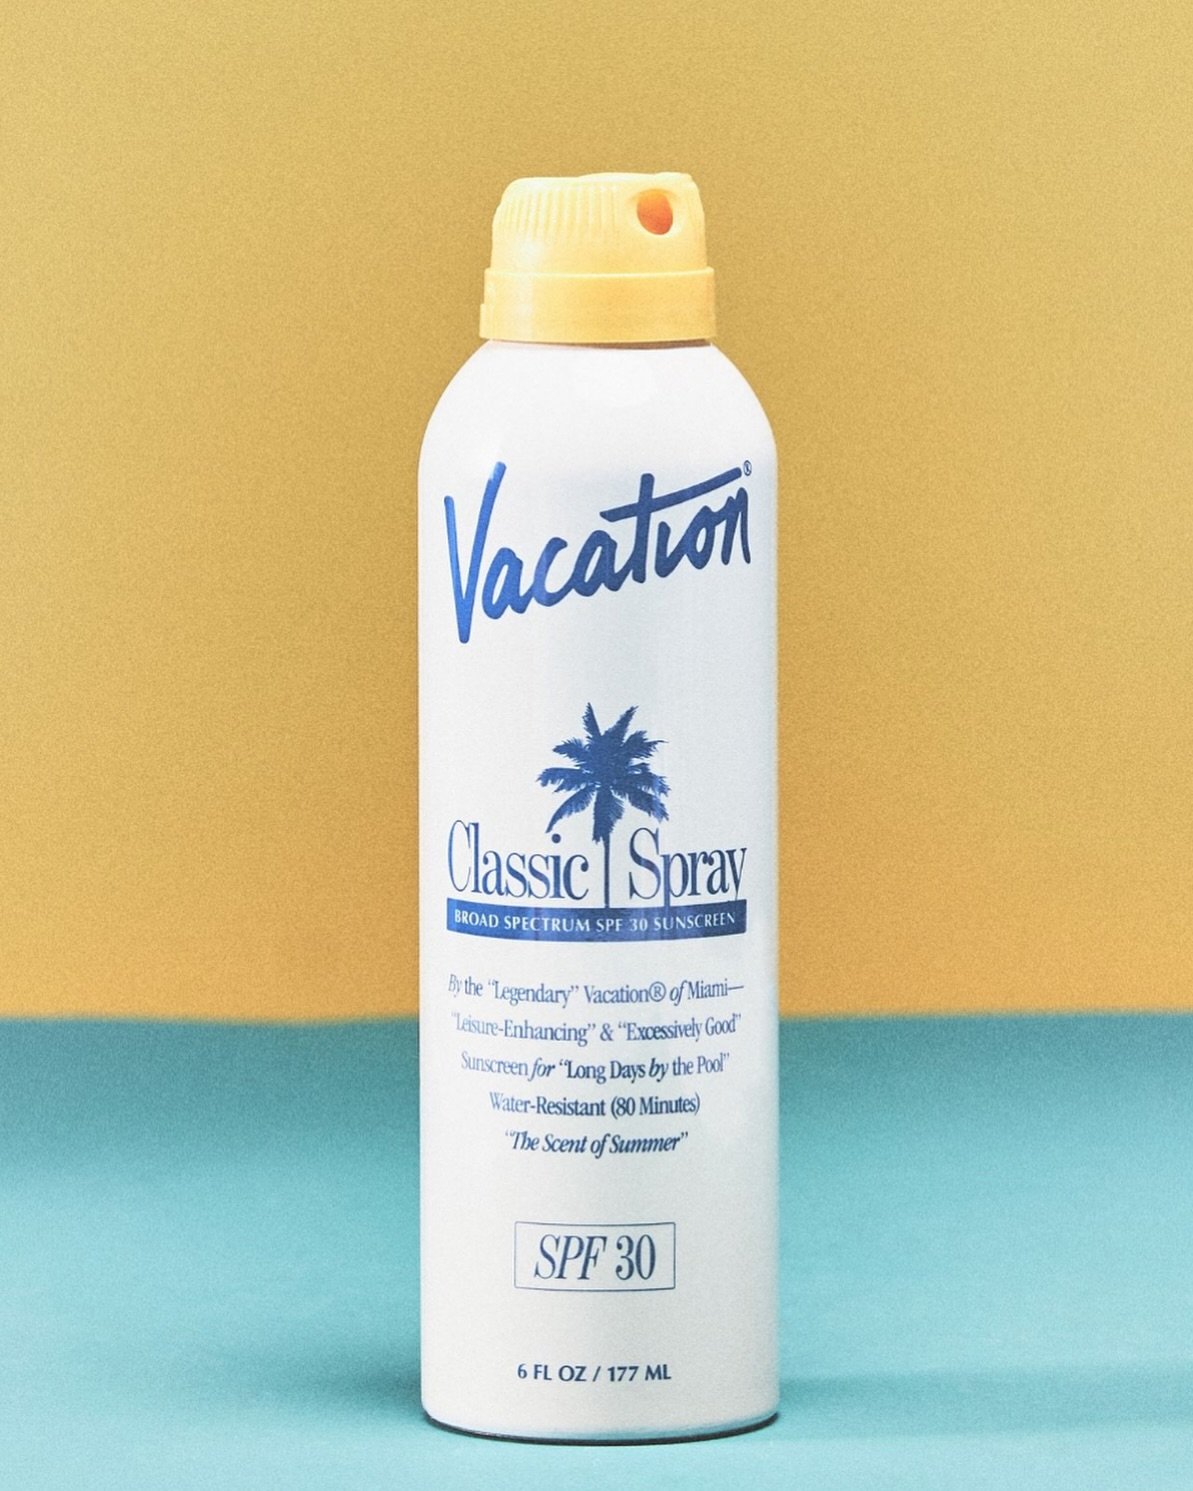 Smells like summer.☀️Infused with vitamins and botanicals, this reef-friendly sunscreen spray was developed with ARQUISTE Parfumeur for a formula that evokes the scents of summer.

$20